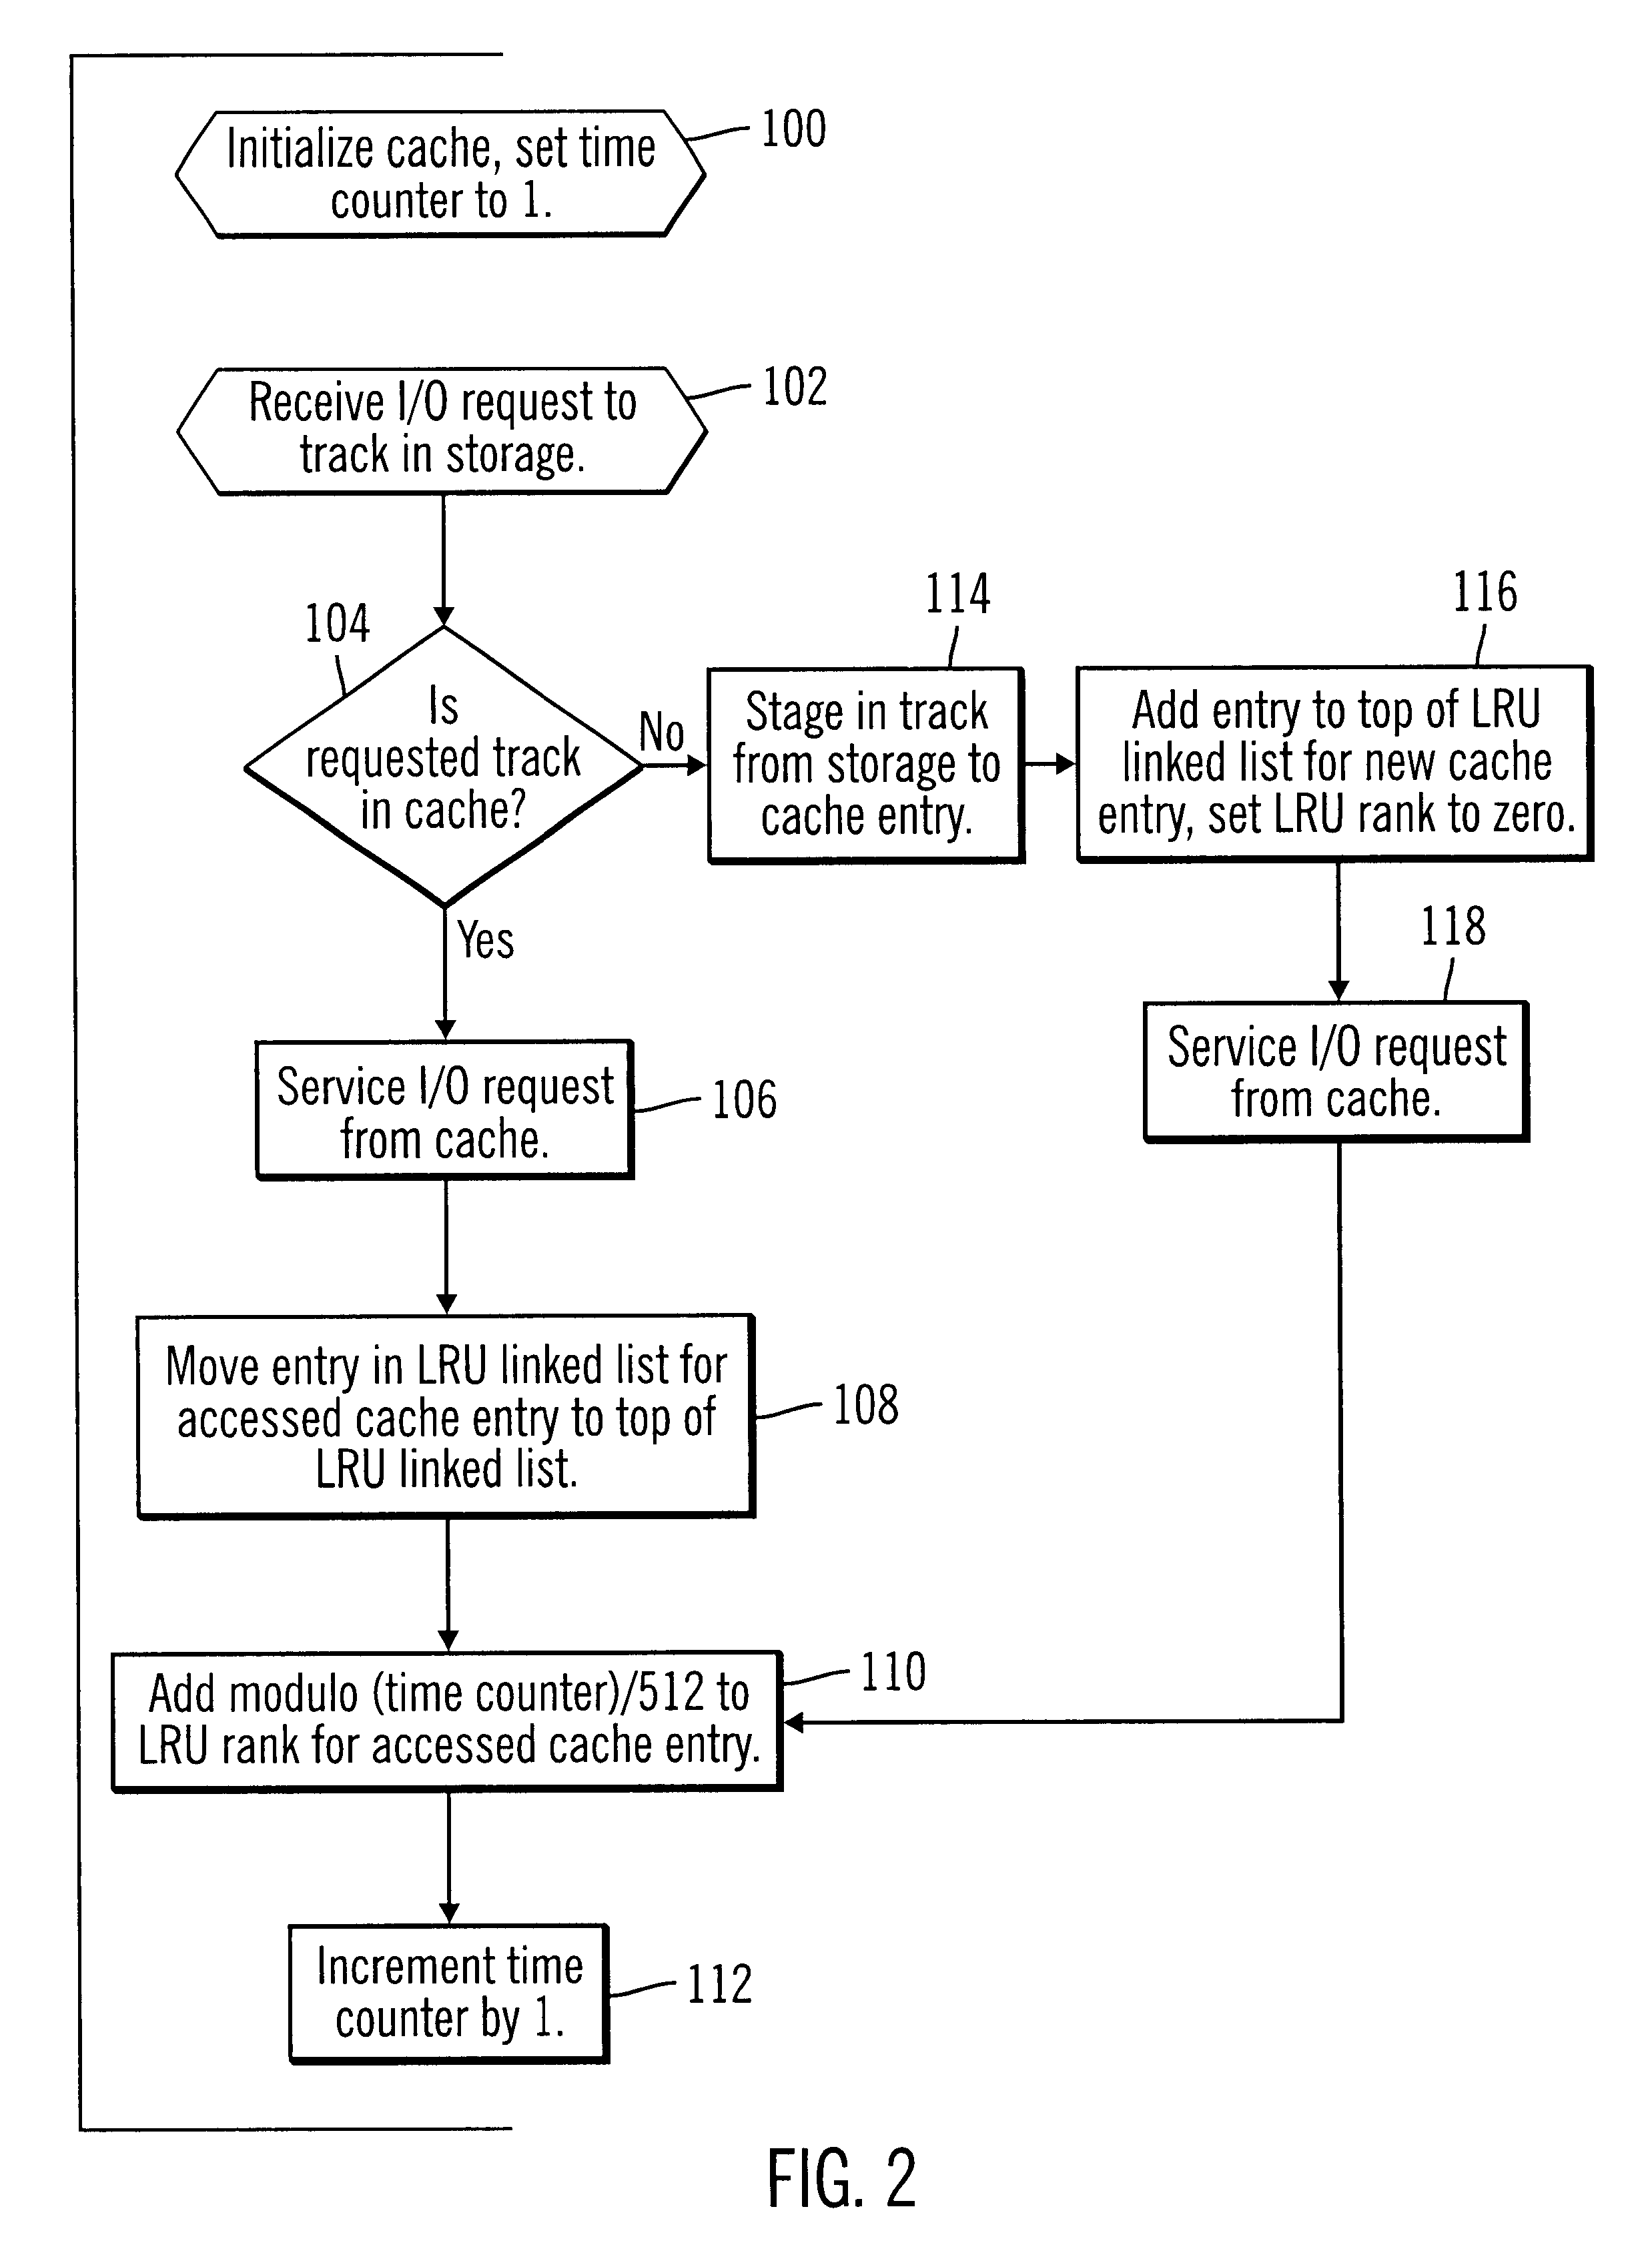 Method, system, and program for demoting data from cache based on least recently accessed and least frequently accessed data